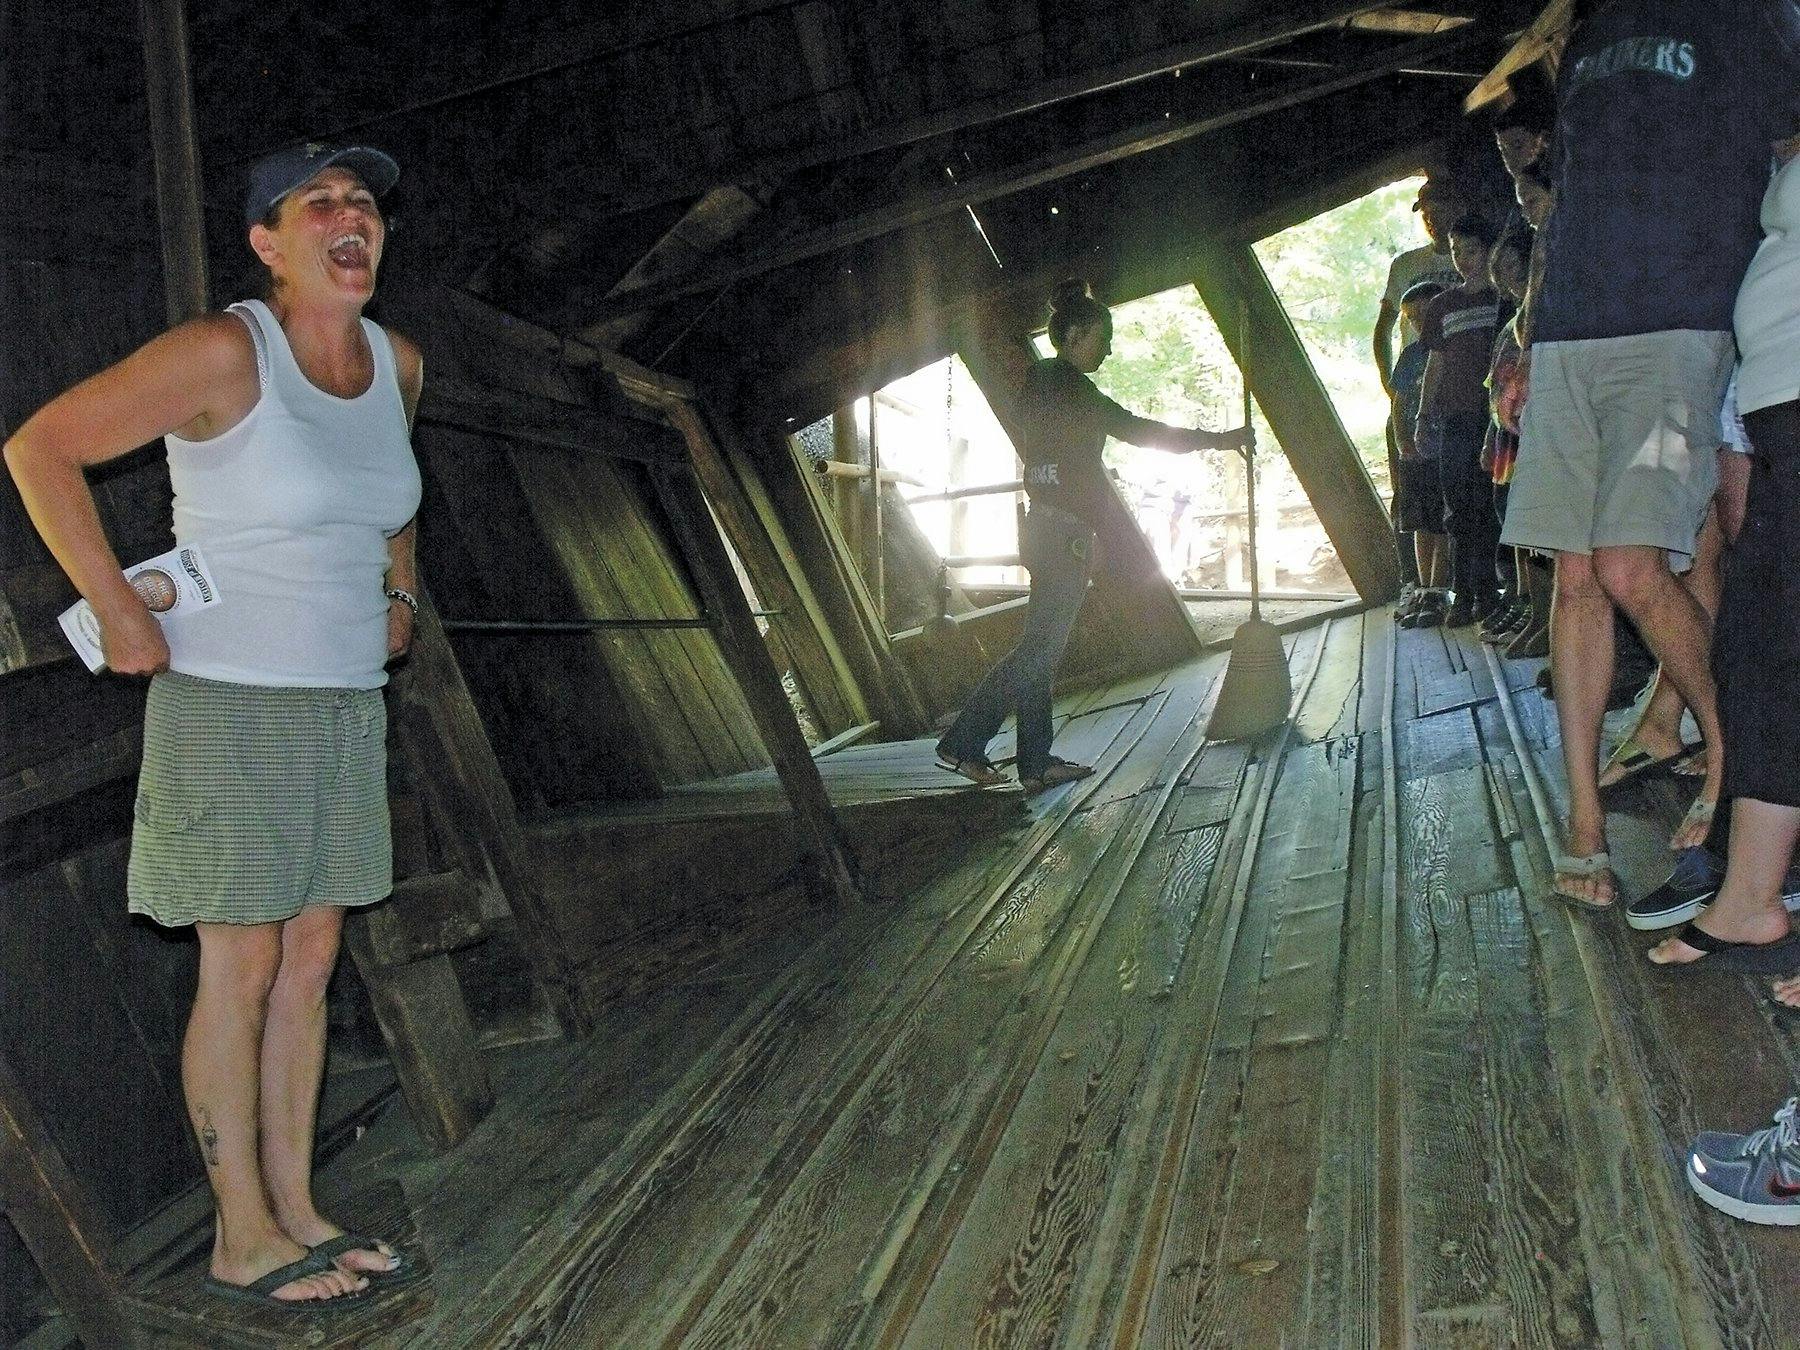 The Oregon Vortex & House of Mystery